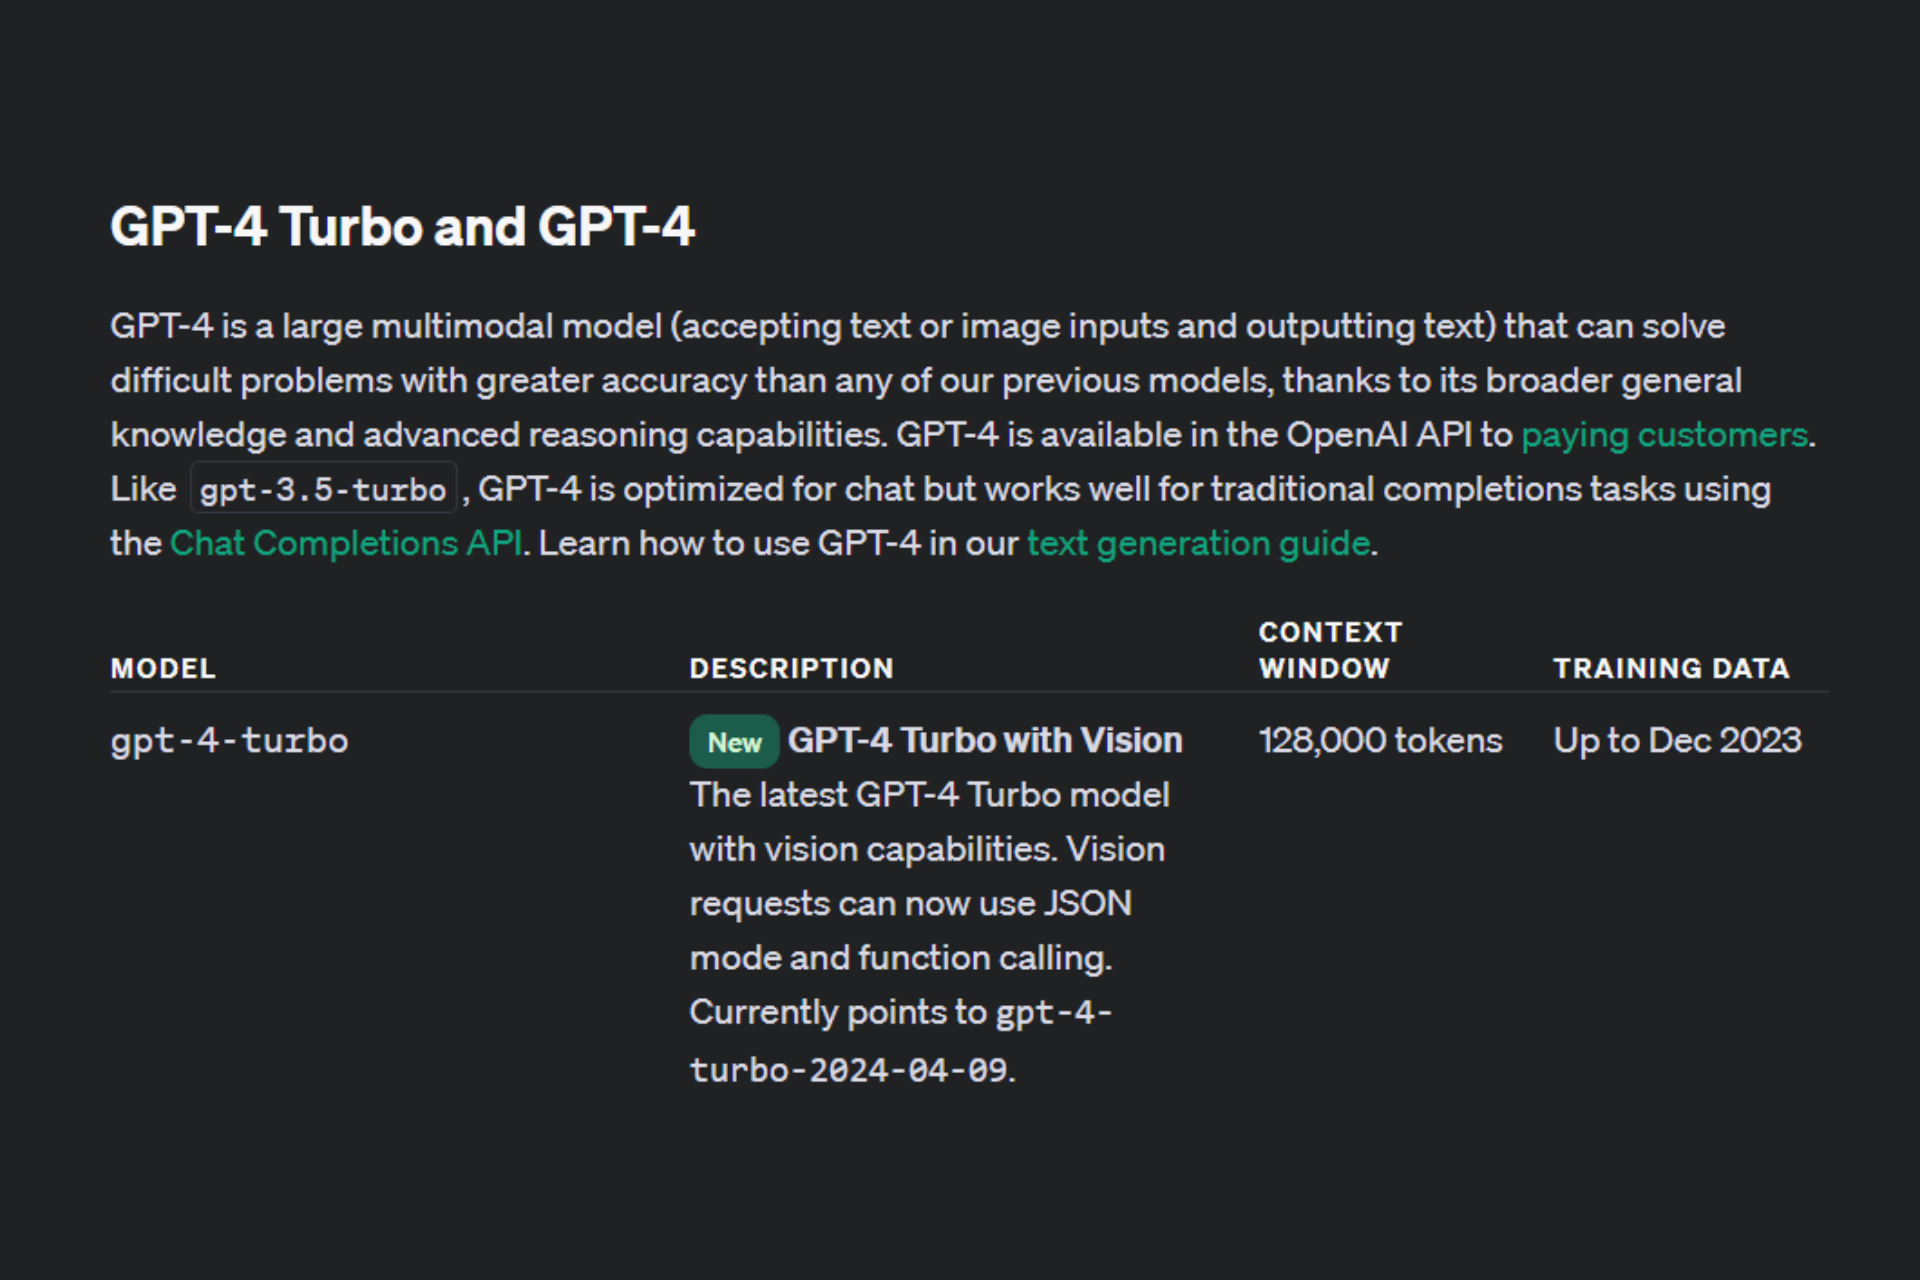 Open AI released GPT-4 Turbo with Vision in the API